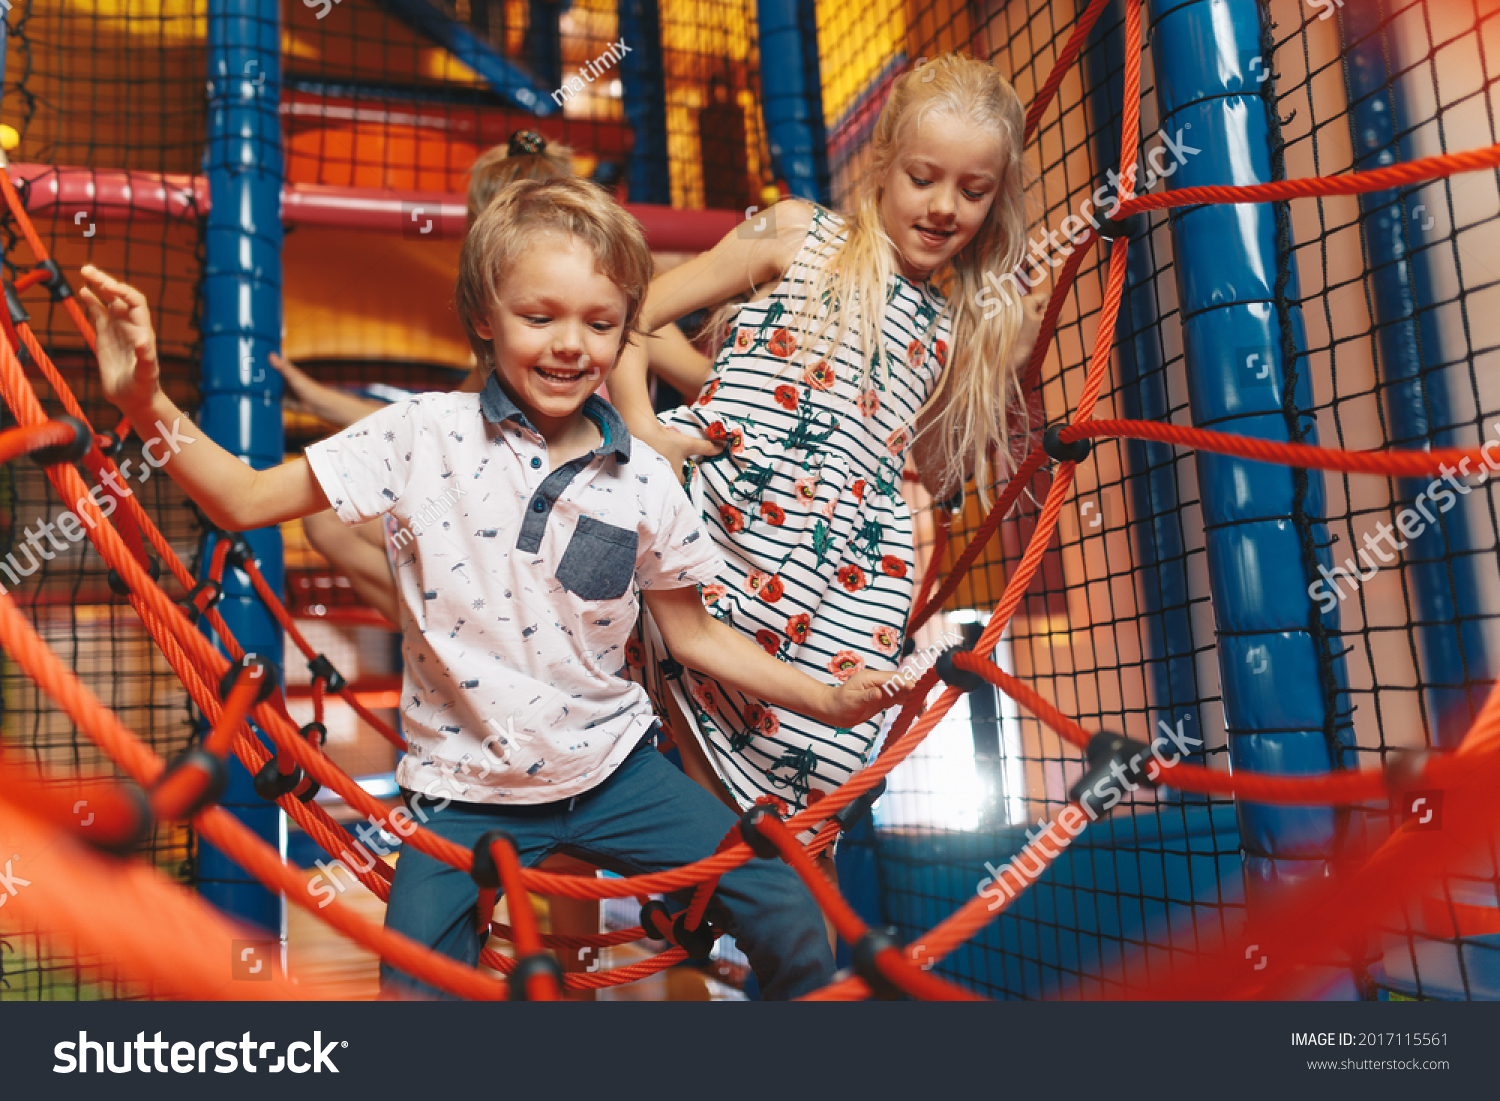 Happy group of siblings playing together on indoor playground. Excited kids playing together on net ropes. Cute school kids playing on the colorful playground at shopping mall #2017115561